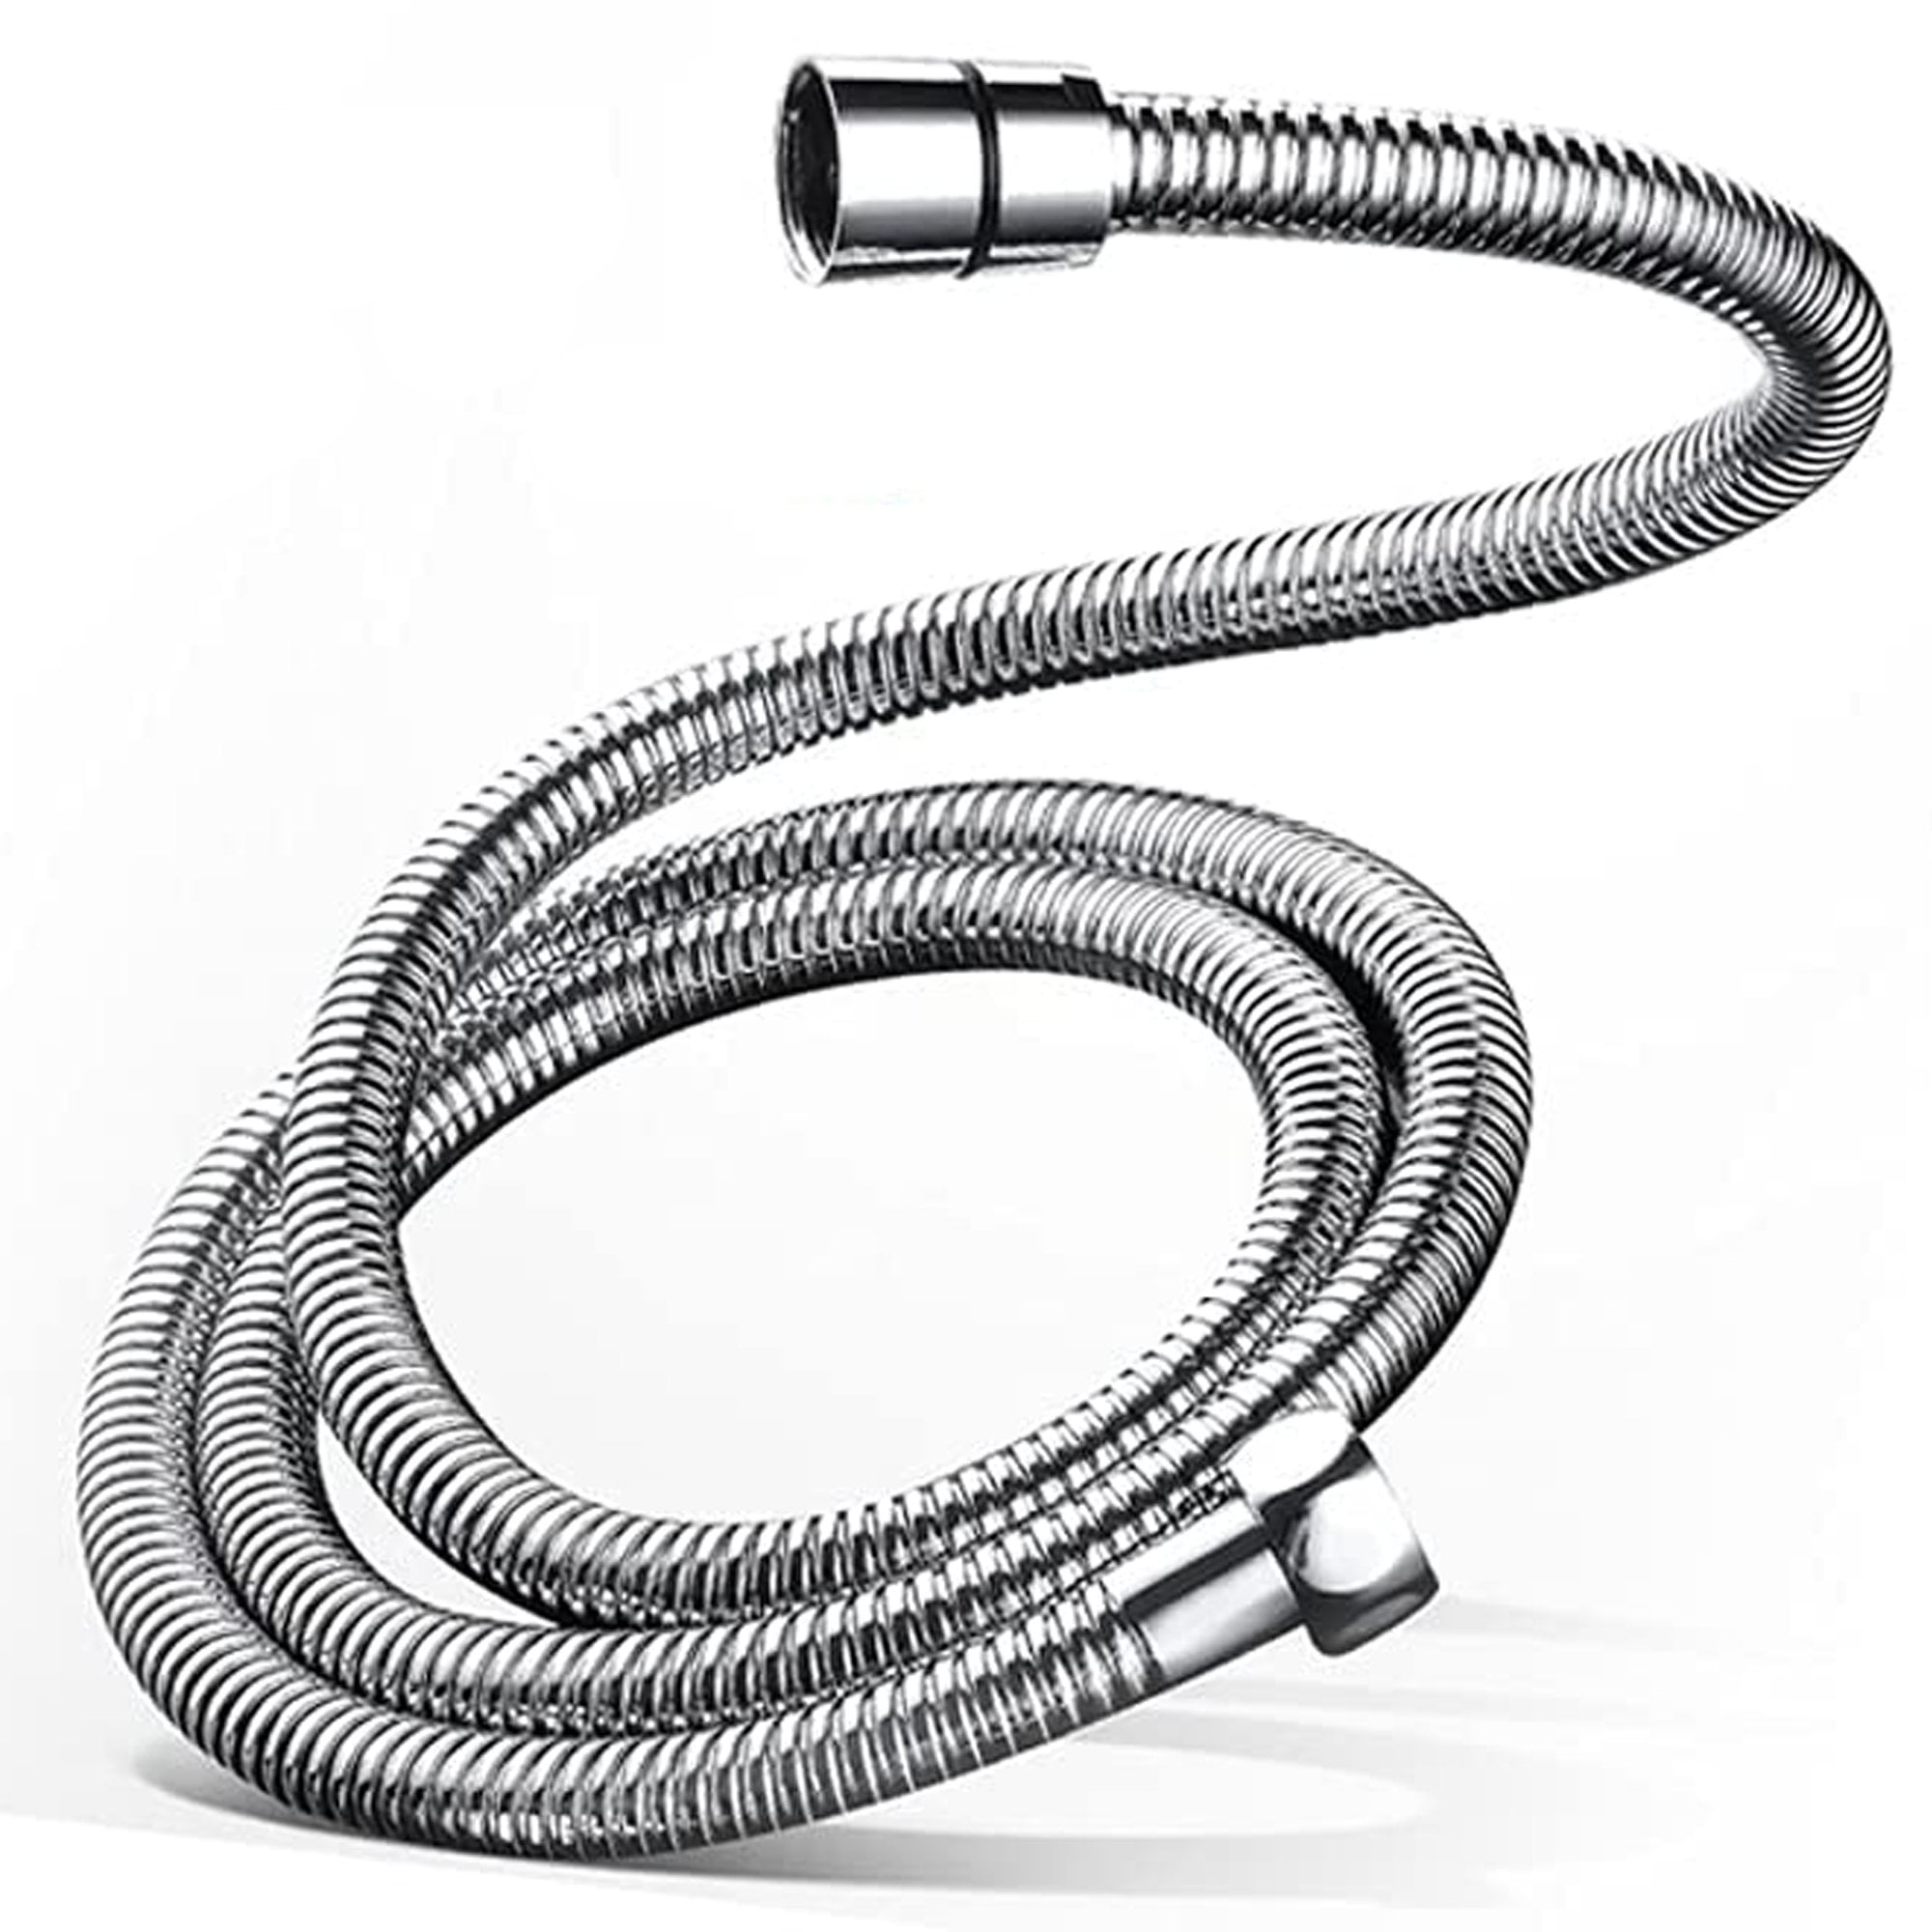 FITS MOST HANDSETS !!!! 1.25M POLISHED STAINLESS STEEL LARGE BORE SHOWER HOSE 